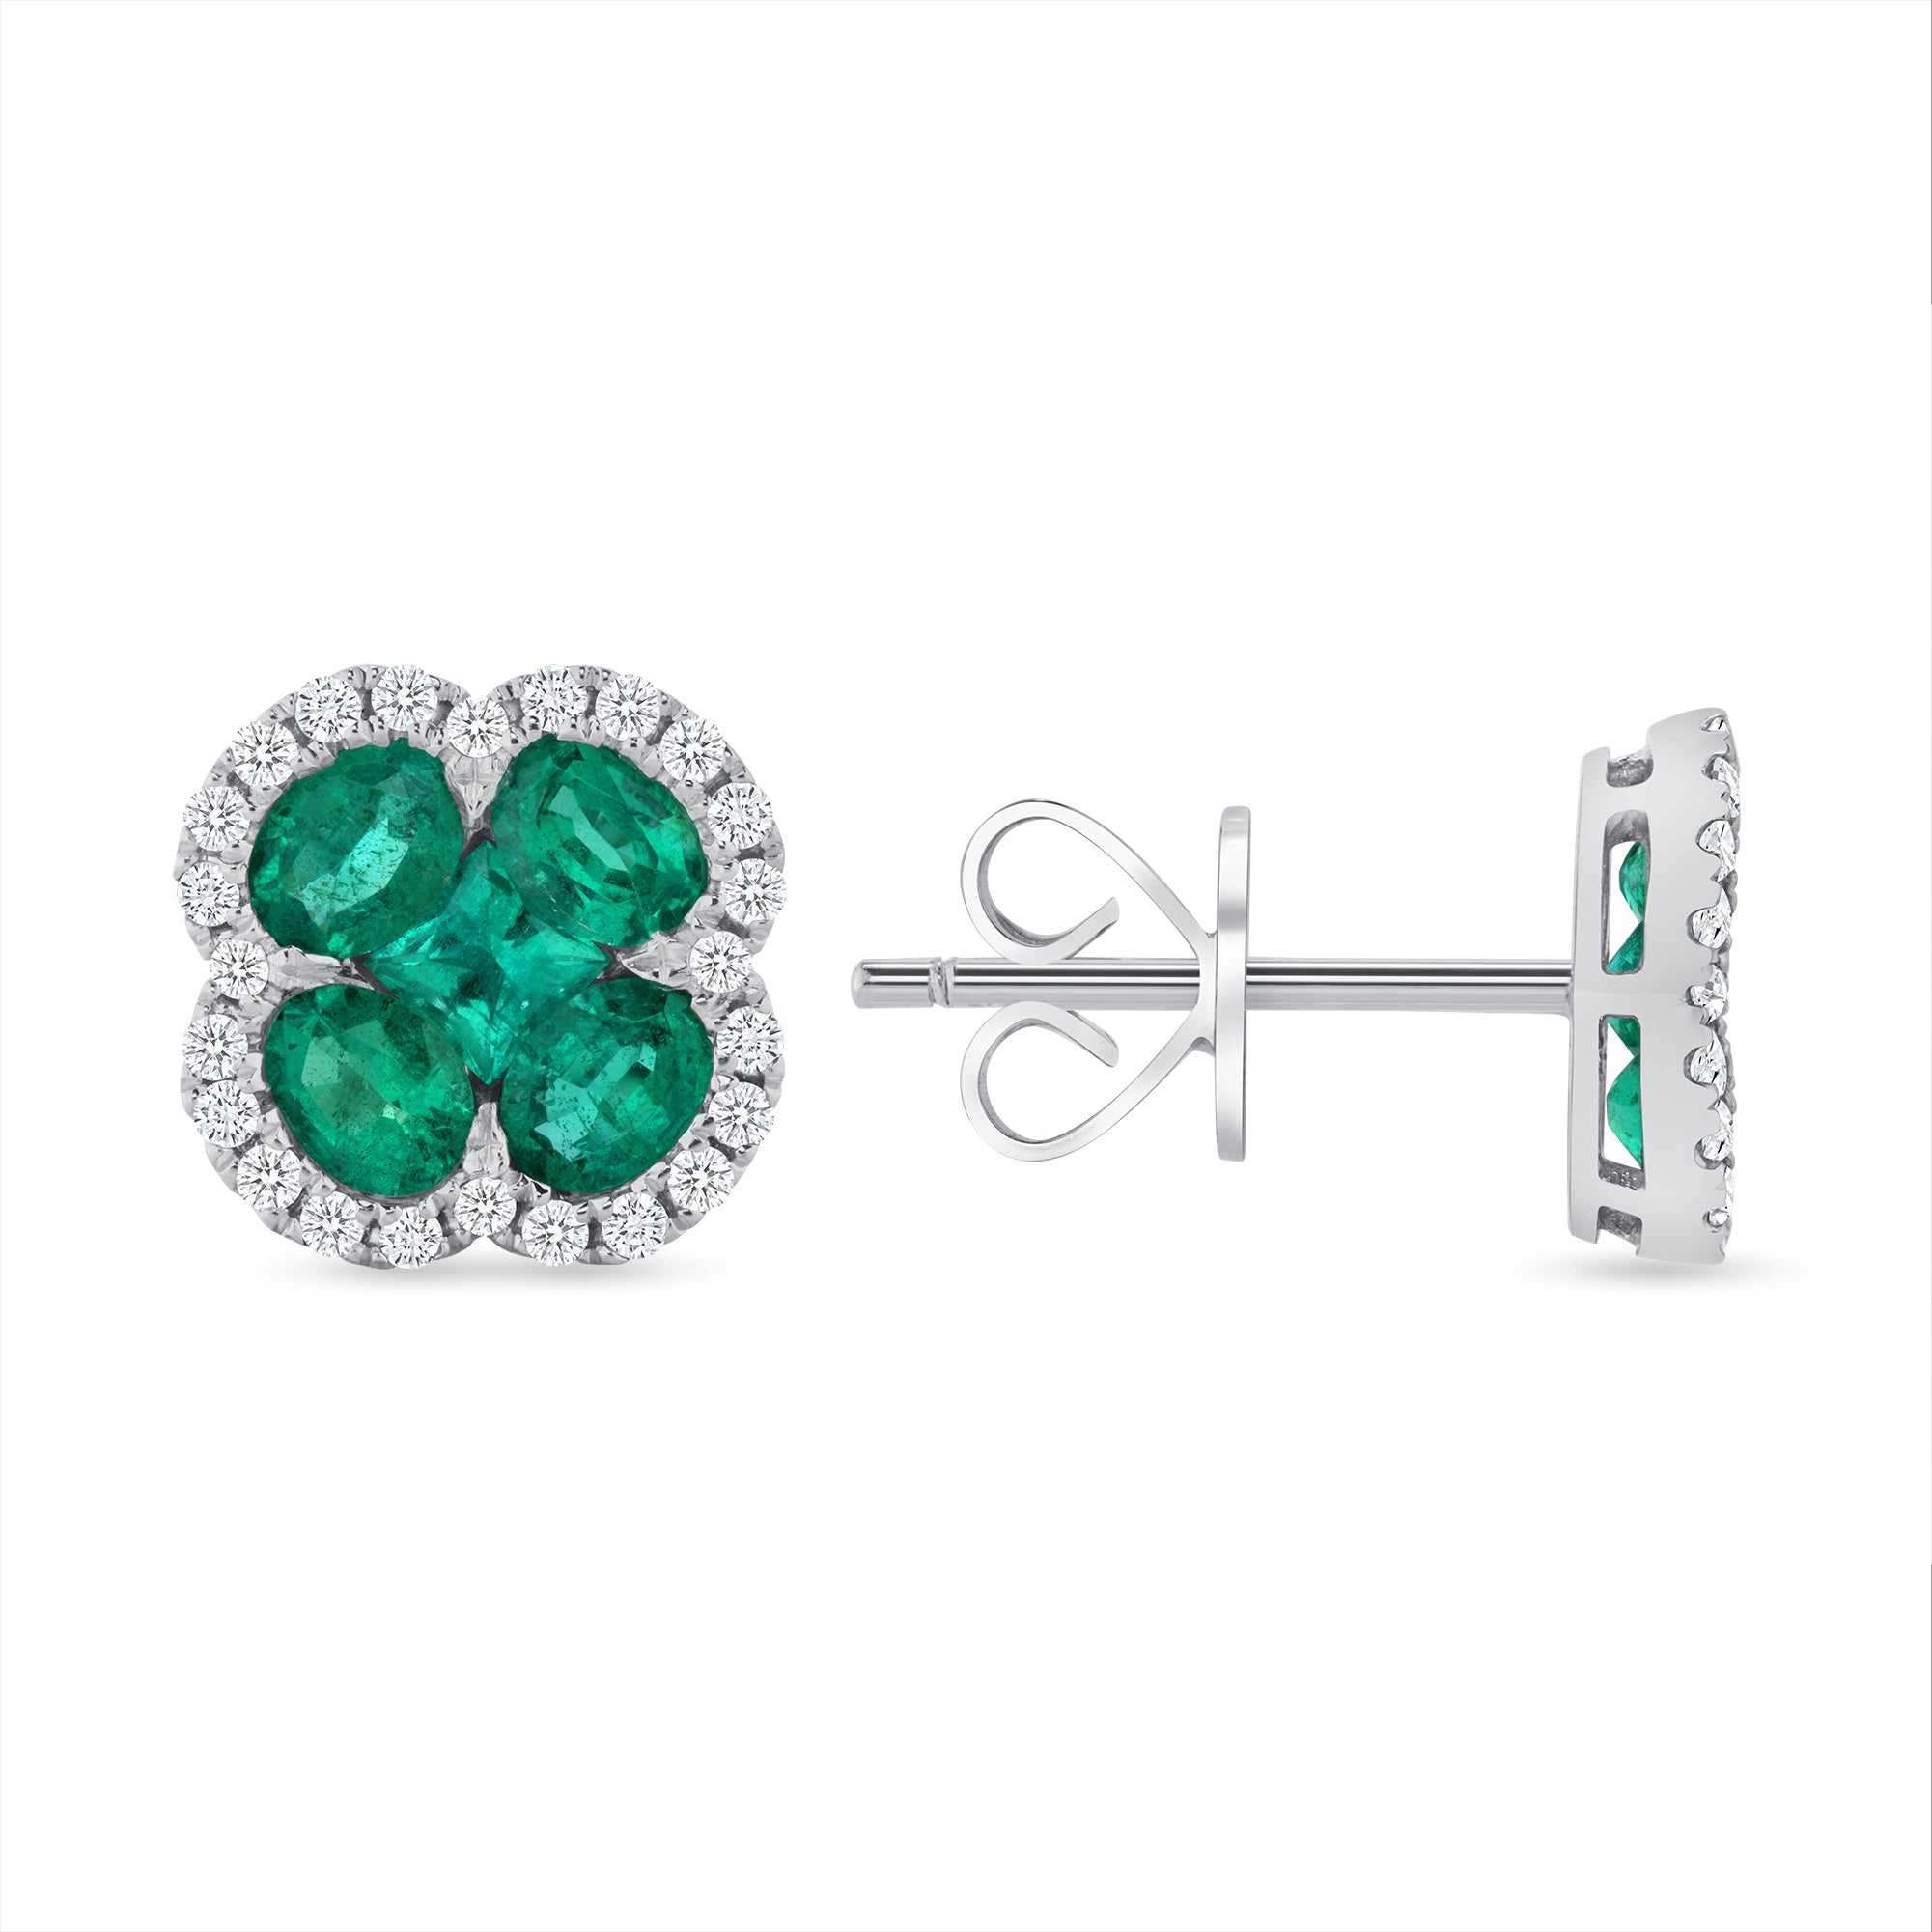 2.97tcw Round Colombian Emerald and Halo Diamond Flower Stud Earrings 18k White Gold